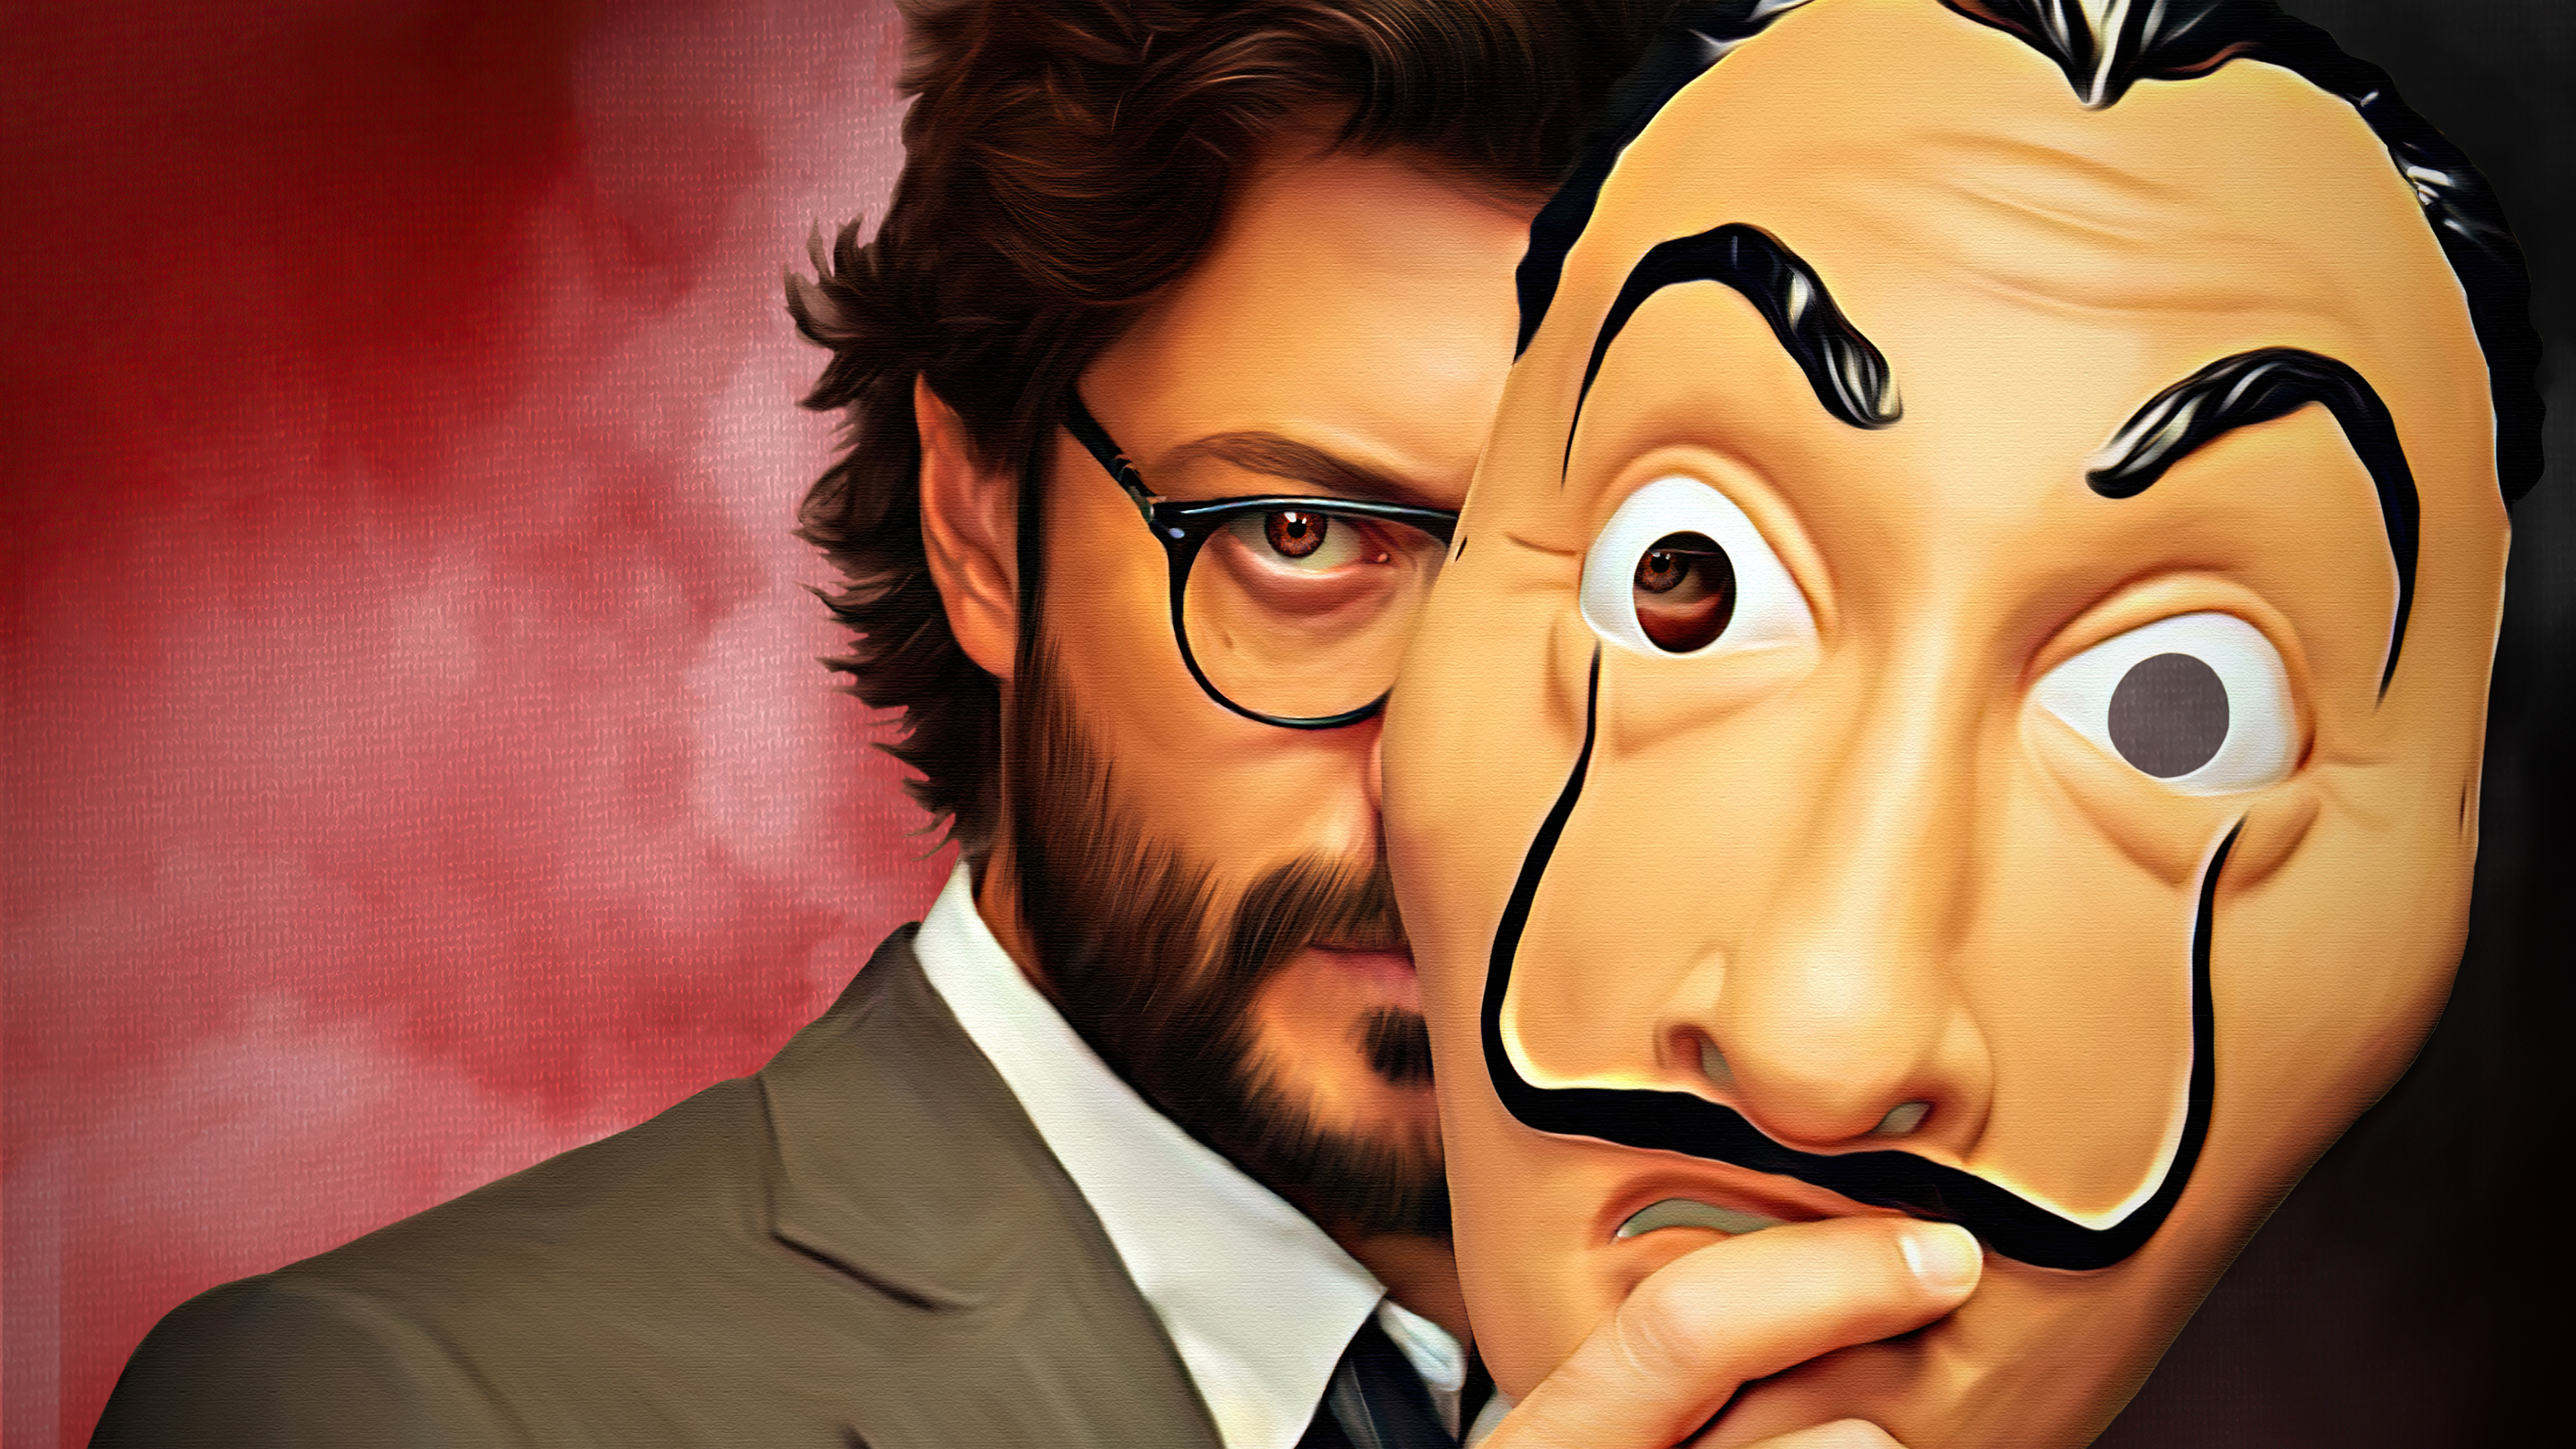 The Professor Digital Painting Money Heist, HD Tv Shows, 4k Wallpapers,  Images, Backgrounds, Photos and Pictures